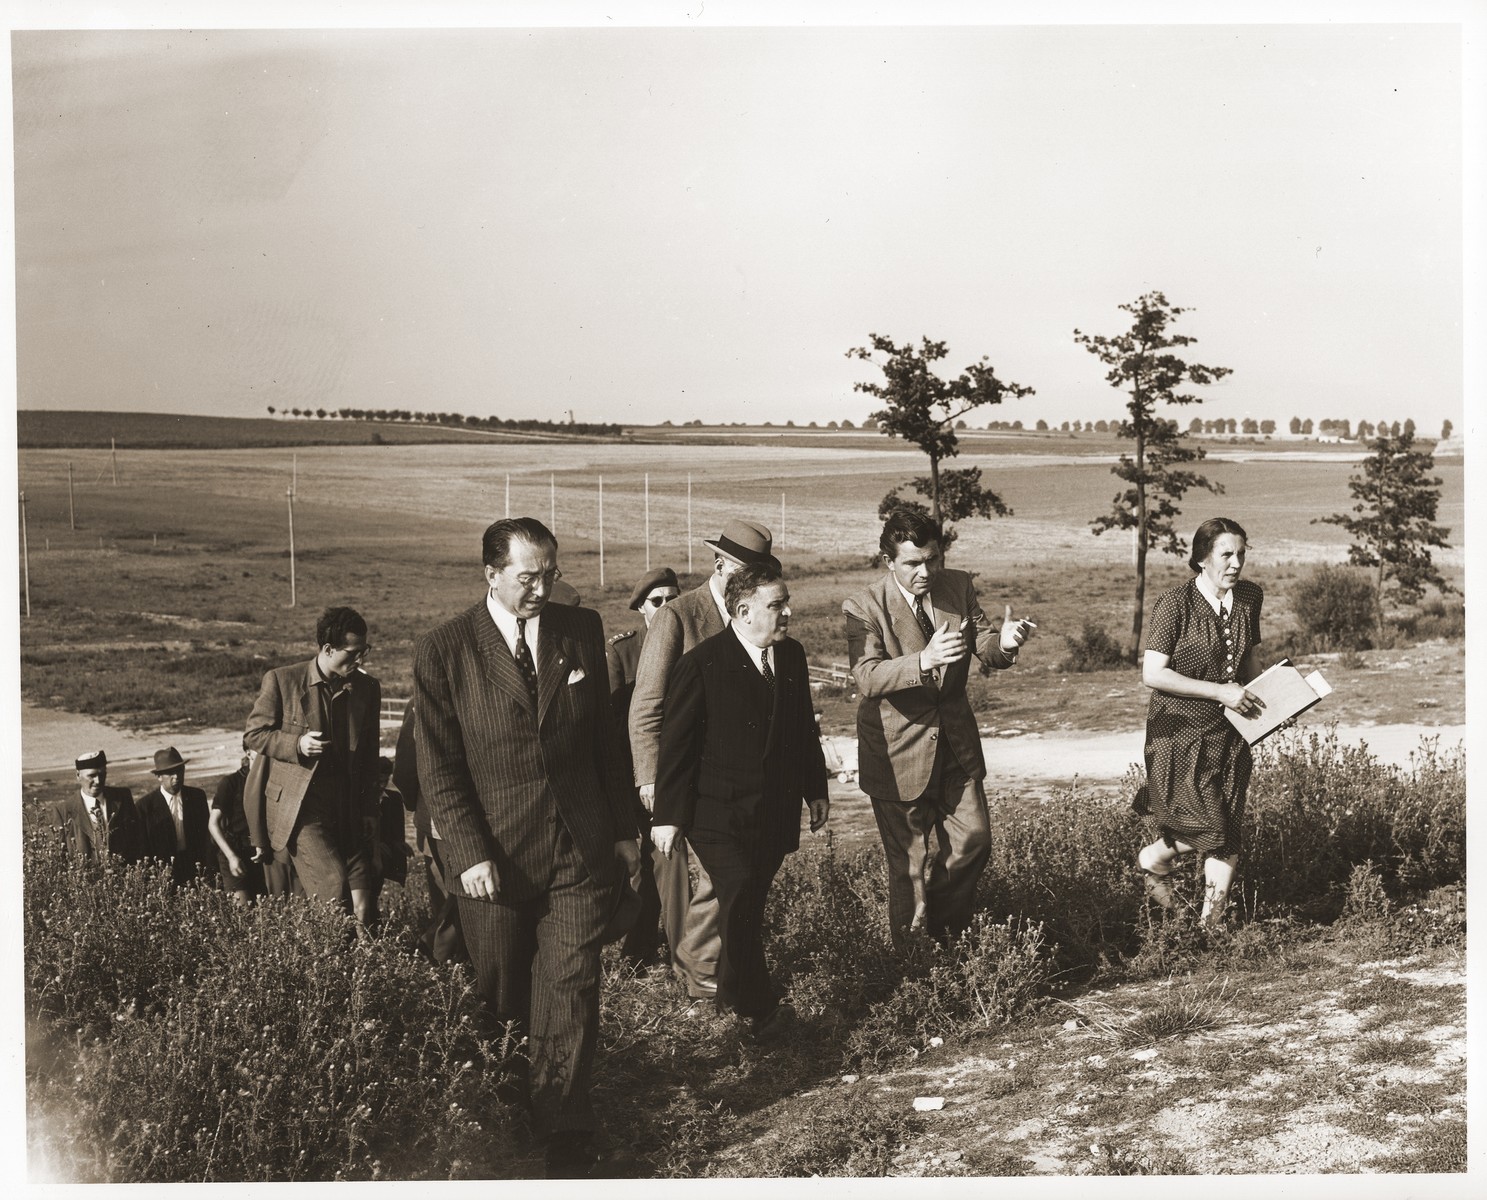 During an official visit to Lidice UNRRA Director General Fiorello La Guardia visits the site of the Nazi massacre of Czech civilians which was perpetrated in June 1942 in retaliation for the assassination of Reinhard Heydrich, then Reichsprotektor of the Protectorate of Bohemia and Moravia.

LaGuardia is accompanied by Vaclav Majer (left), Czech Minister of Food, Mr. Nemec, Czech Minister Plenipotentiary and government delegate to UNRRA, and Laurence Steinhardt (partially concealed behind LaGuardia), U.S. Ambassador to Czechoslovakia.